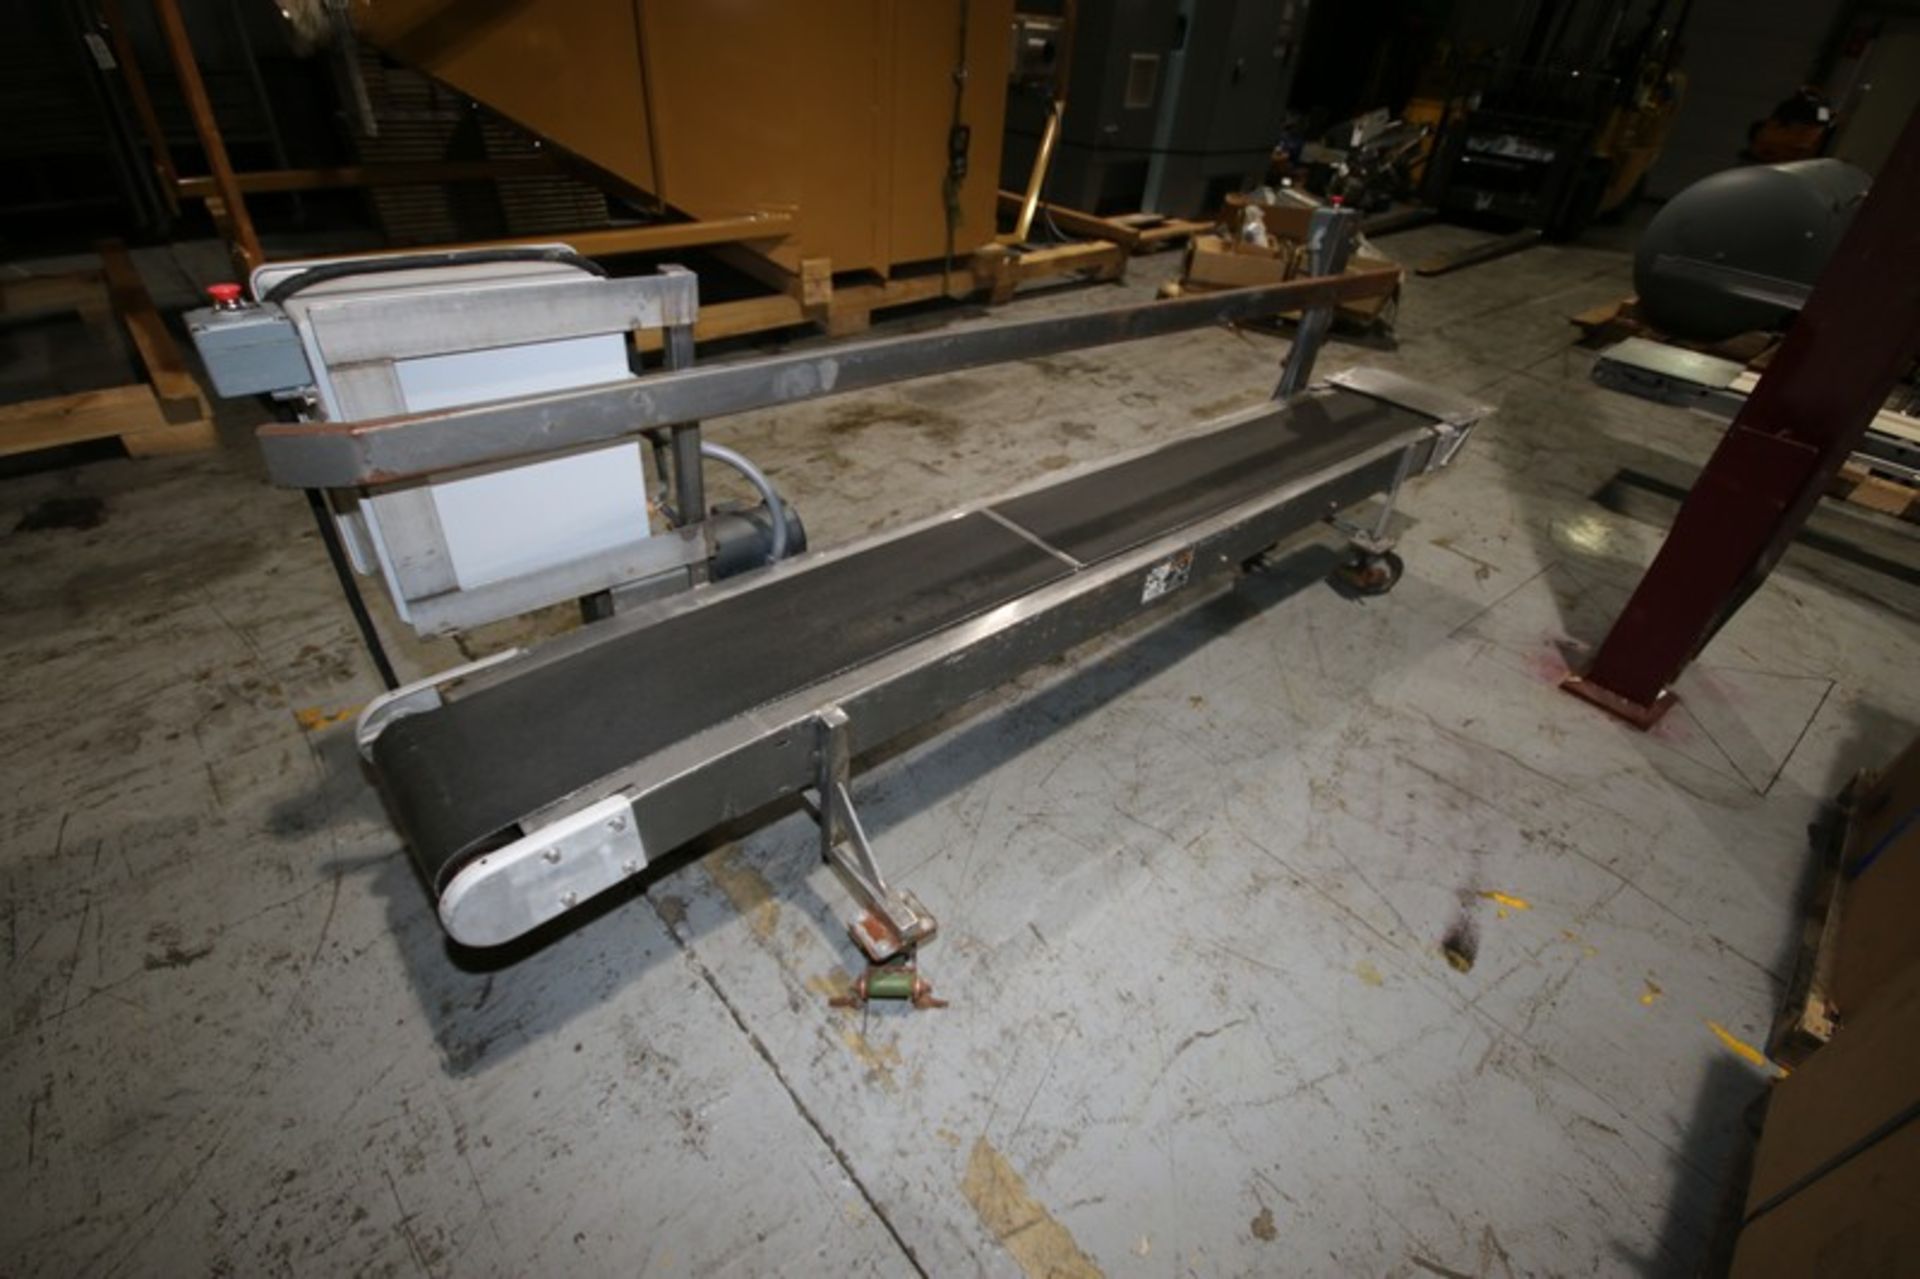 Chantland S/S Portable Power Belt Conveyor, Model 4201, S/N 39282, Overall Dims.: Aprox. 125" L x - Image 4 of 6